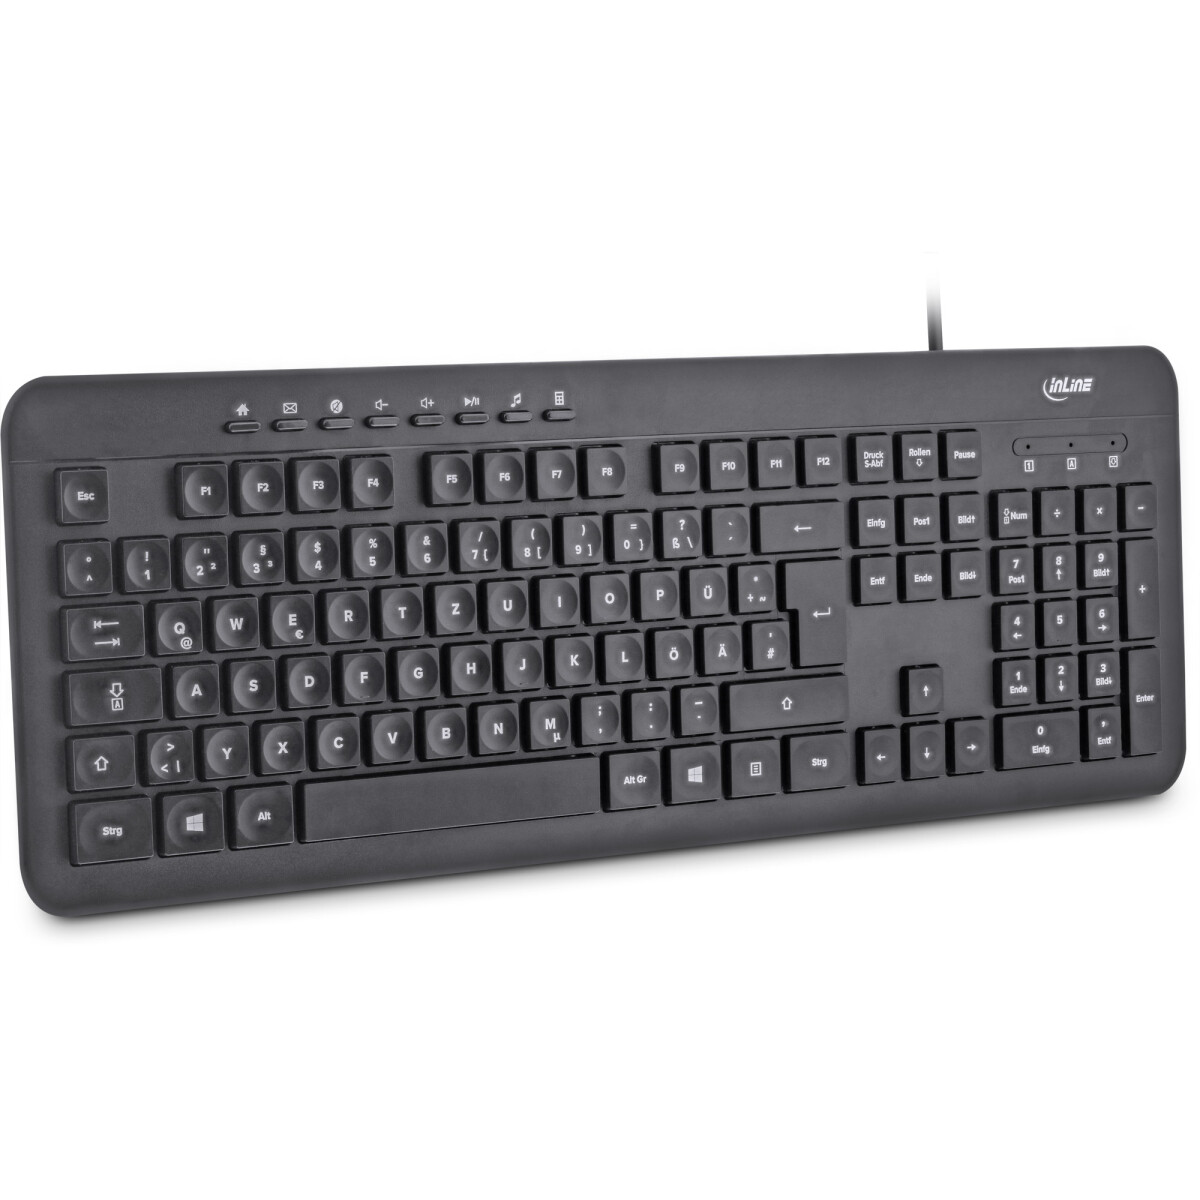 InLine® Keyboard with USB cable, German layout, black